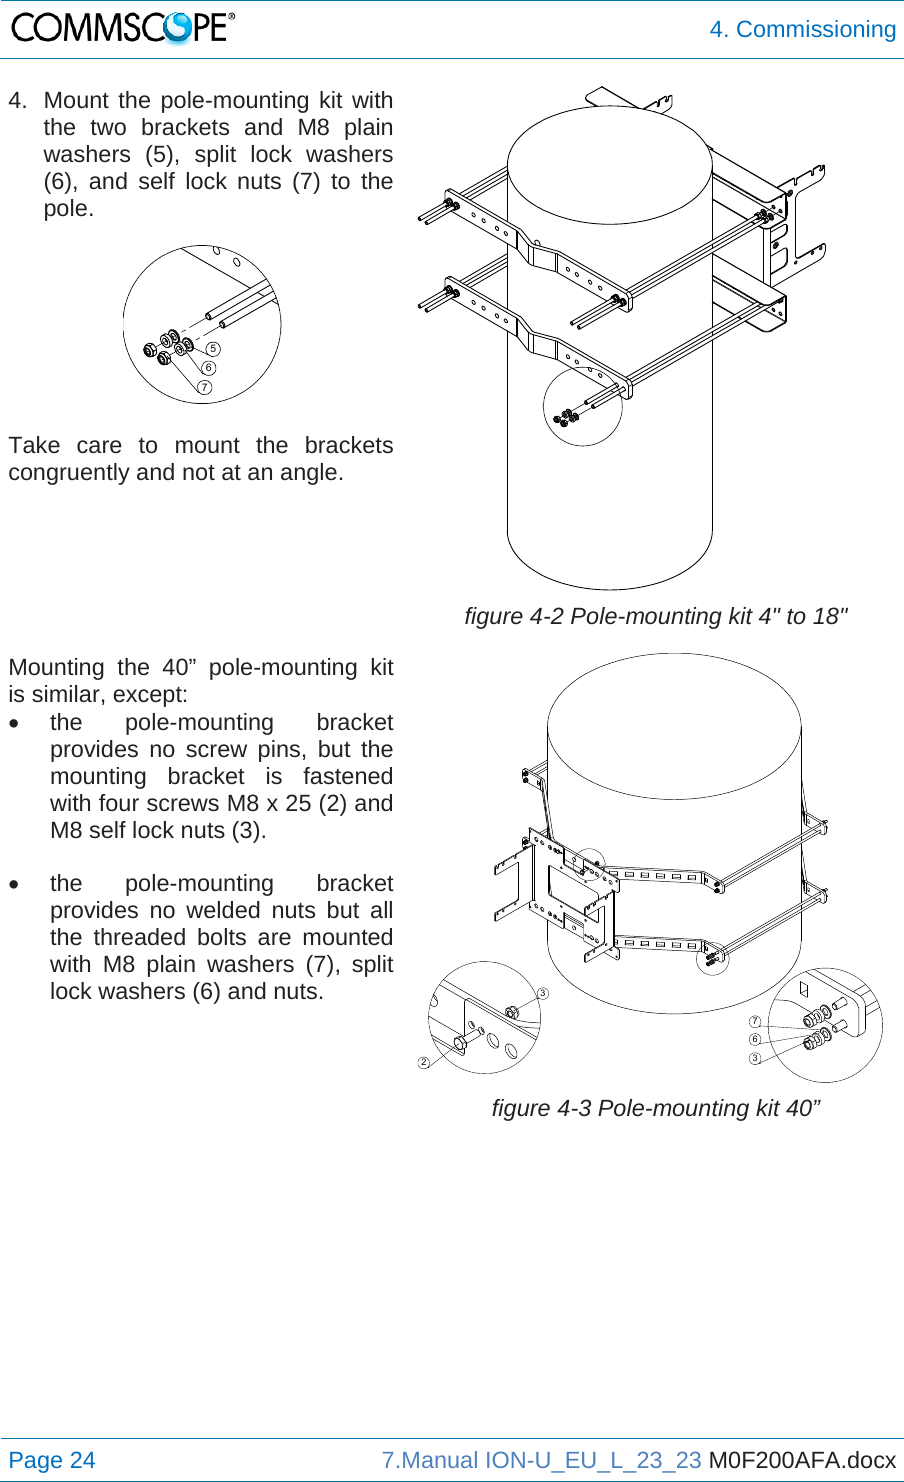  4. Commissioning Page 24  7.Manual ION-U_EU_L_23_23 M0F200AFA.docx  4.  Mount the pole-mounting kit with the two brackets and M8 plain washers (5), split lock washers (6), and self lock nuts (7) to the pole.   Take care to mount the brackets congruently and not at an angle.   figure 4-2 Pole-mounting kit 4&quot; to 18&quot; Mounting the 40” pole-mounting kit is similar, except:  the  pole-mounting  bracket provides no screw pins, but the mounting bracket is fastened with four screws M8 x 25 (2) and M8 self lock nuts (3).  the  pole-mounting  bracket provides no welded nuts but all the threaded bolts are mounted with M8 plain washers (7), split lock washers (6) and nuts.  figure 4-3 Pole-mounting kit 40”   76523367